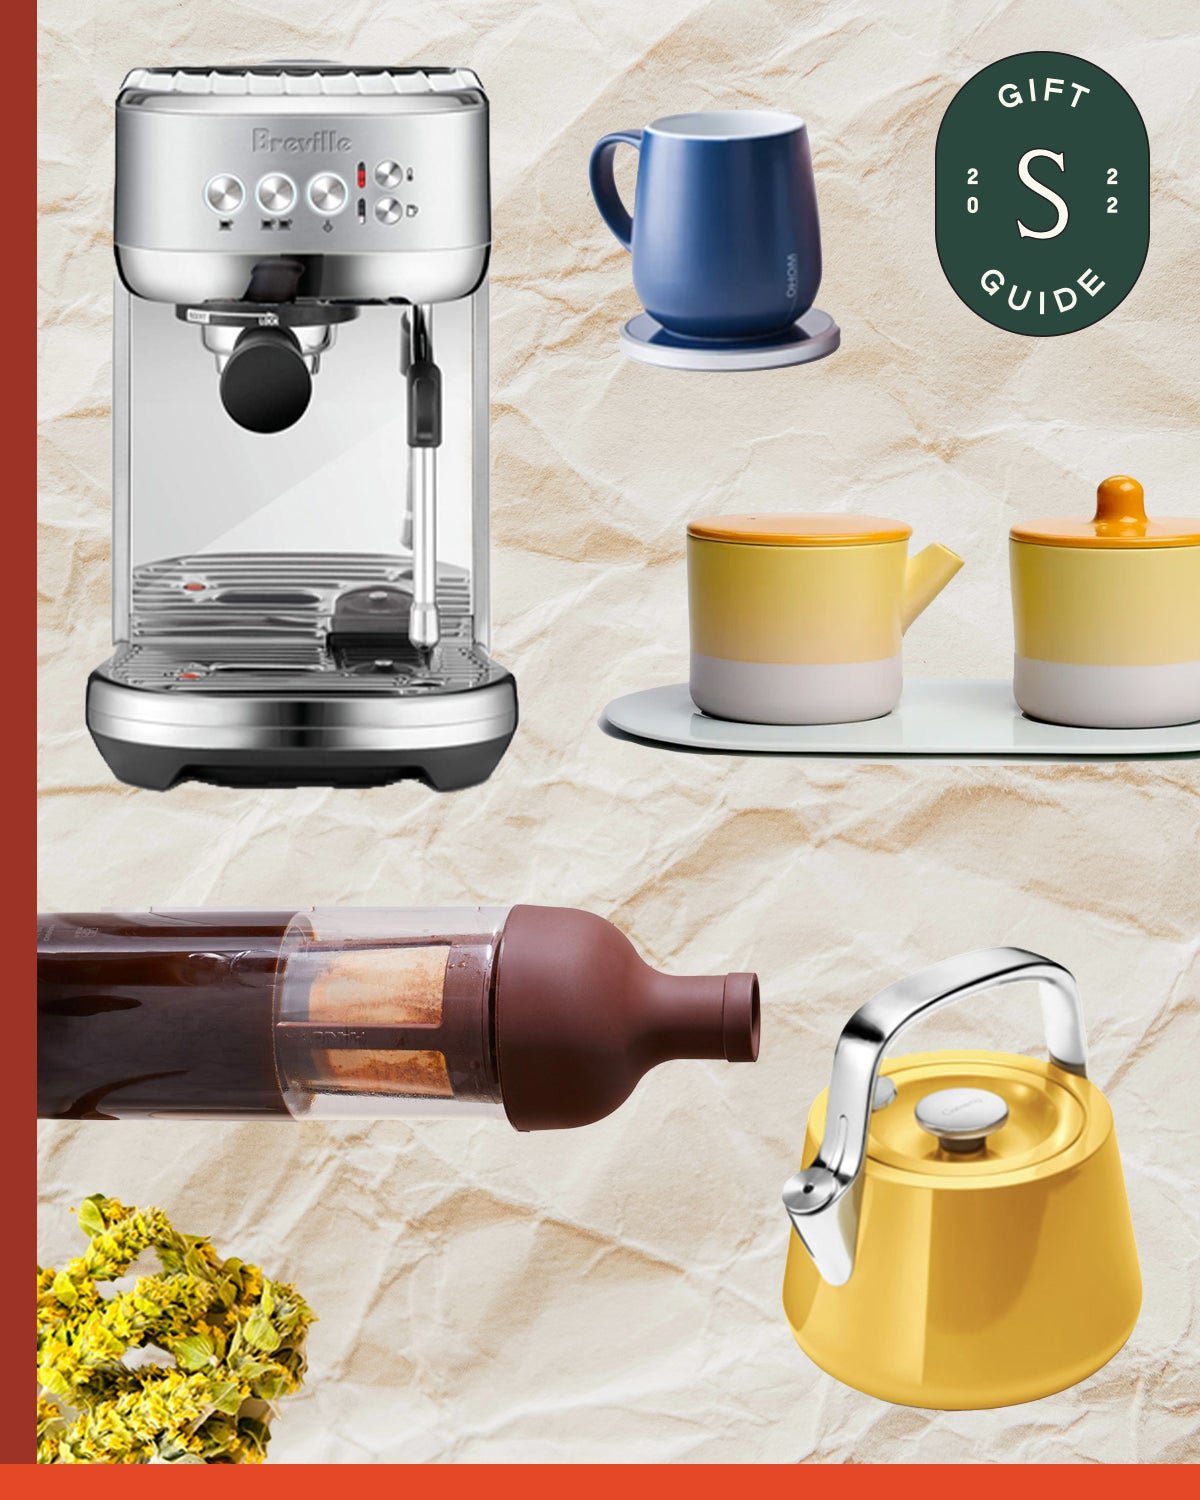 The Best Gifts for Coffee and Tea Lovers